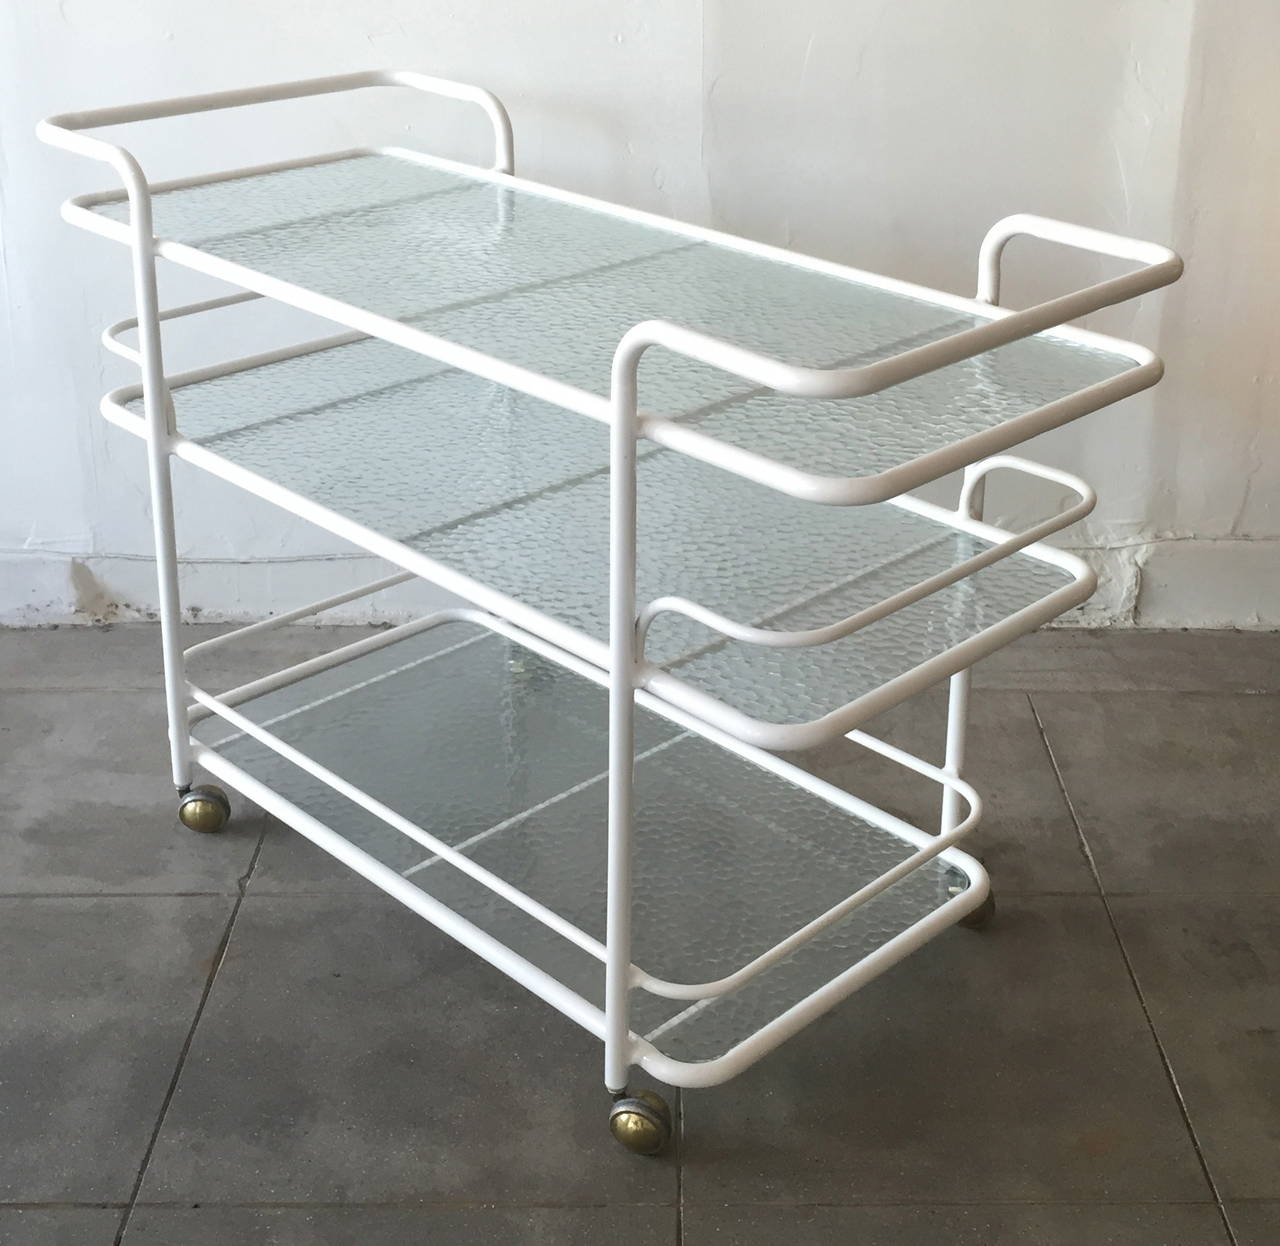 Powder coated white over the original tubular Alcoa Aluminum this bar cart was designed in 1956 by Tadao E. Inouyer as part of the 'Kantan' series for Brown Jordan. The cart is in excellent vintage condition.